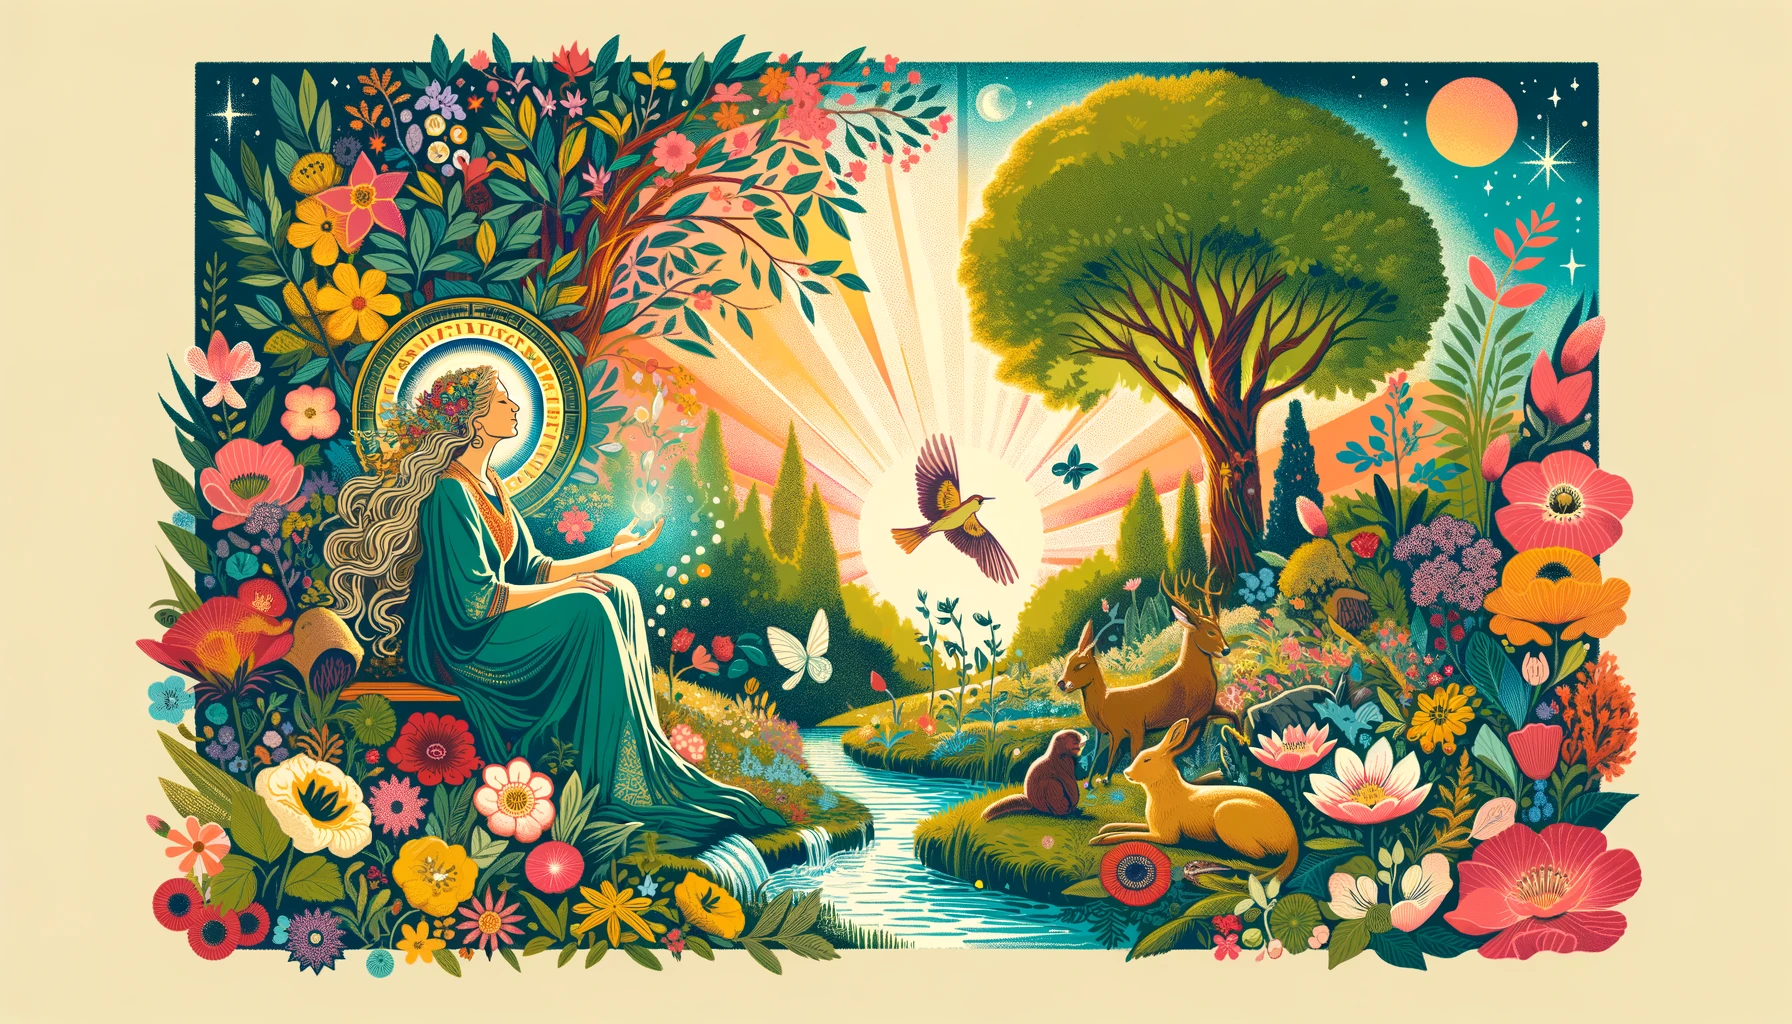 "An illustration representing the nurturing spirit of The Empress, evoking emotions of growth, care, and creative expression. The image features a serene figure surrounded by lush greenery, blooming flowers, and ripe fruits, symbolizing a deep connection to nature and the nurturing of life."